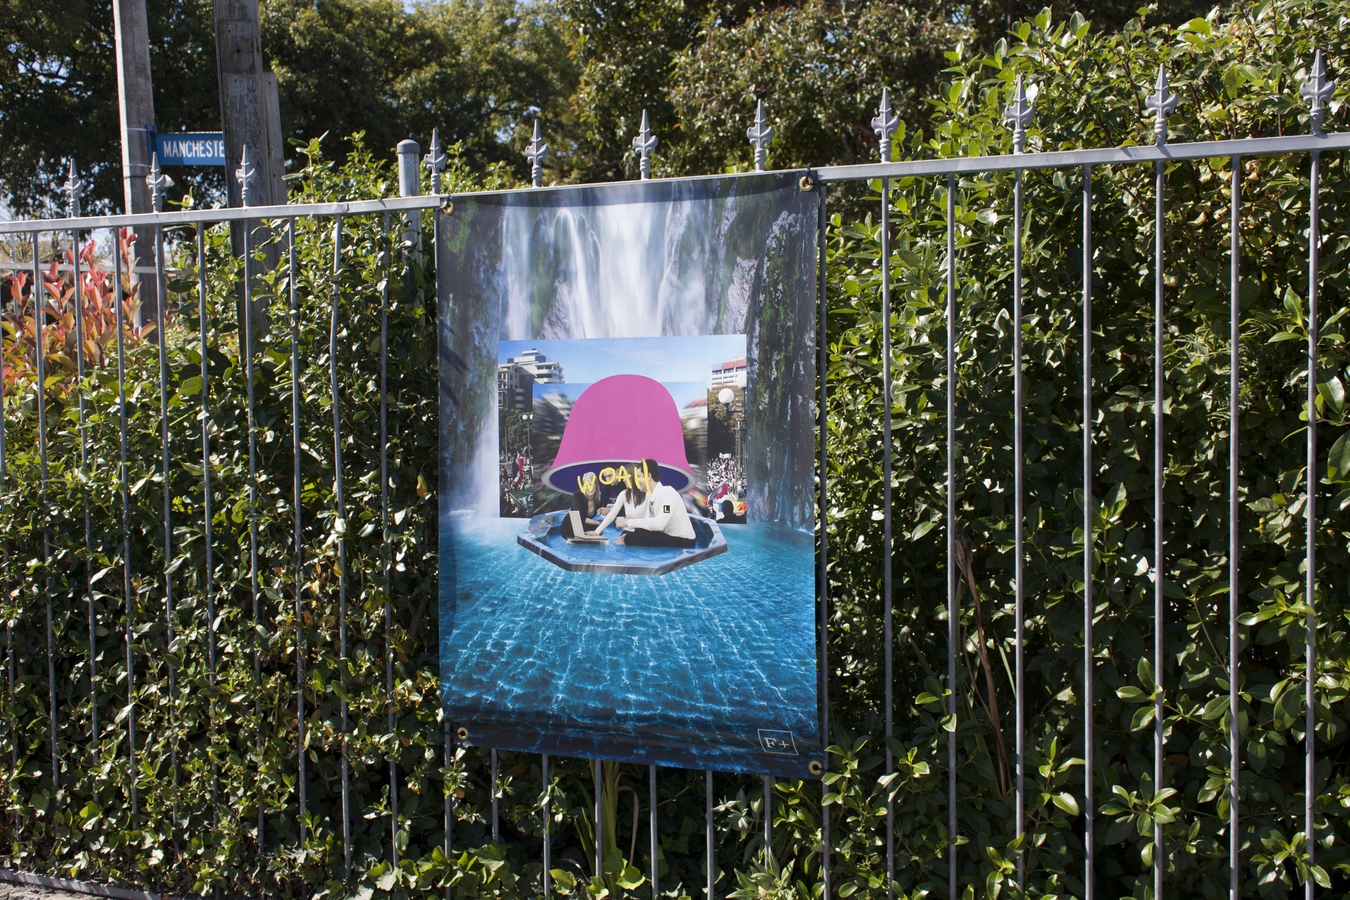 All the Cunning Stunts, Woahmanchester (A Road Movie of Intrepid Dimensions), 2016, Health and Awareness Centre fence, cnr Bealey Avenue & Manchester Street. Photo: Daegan Wells